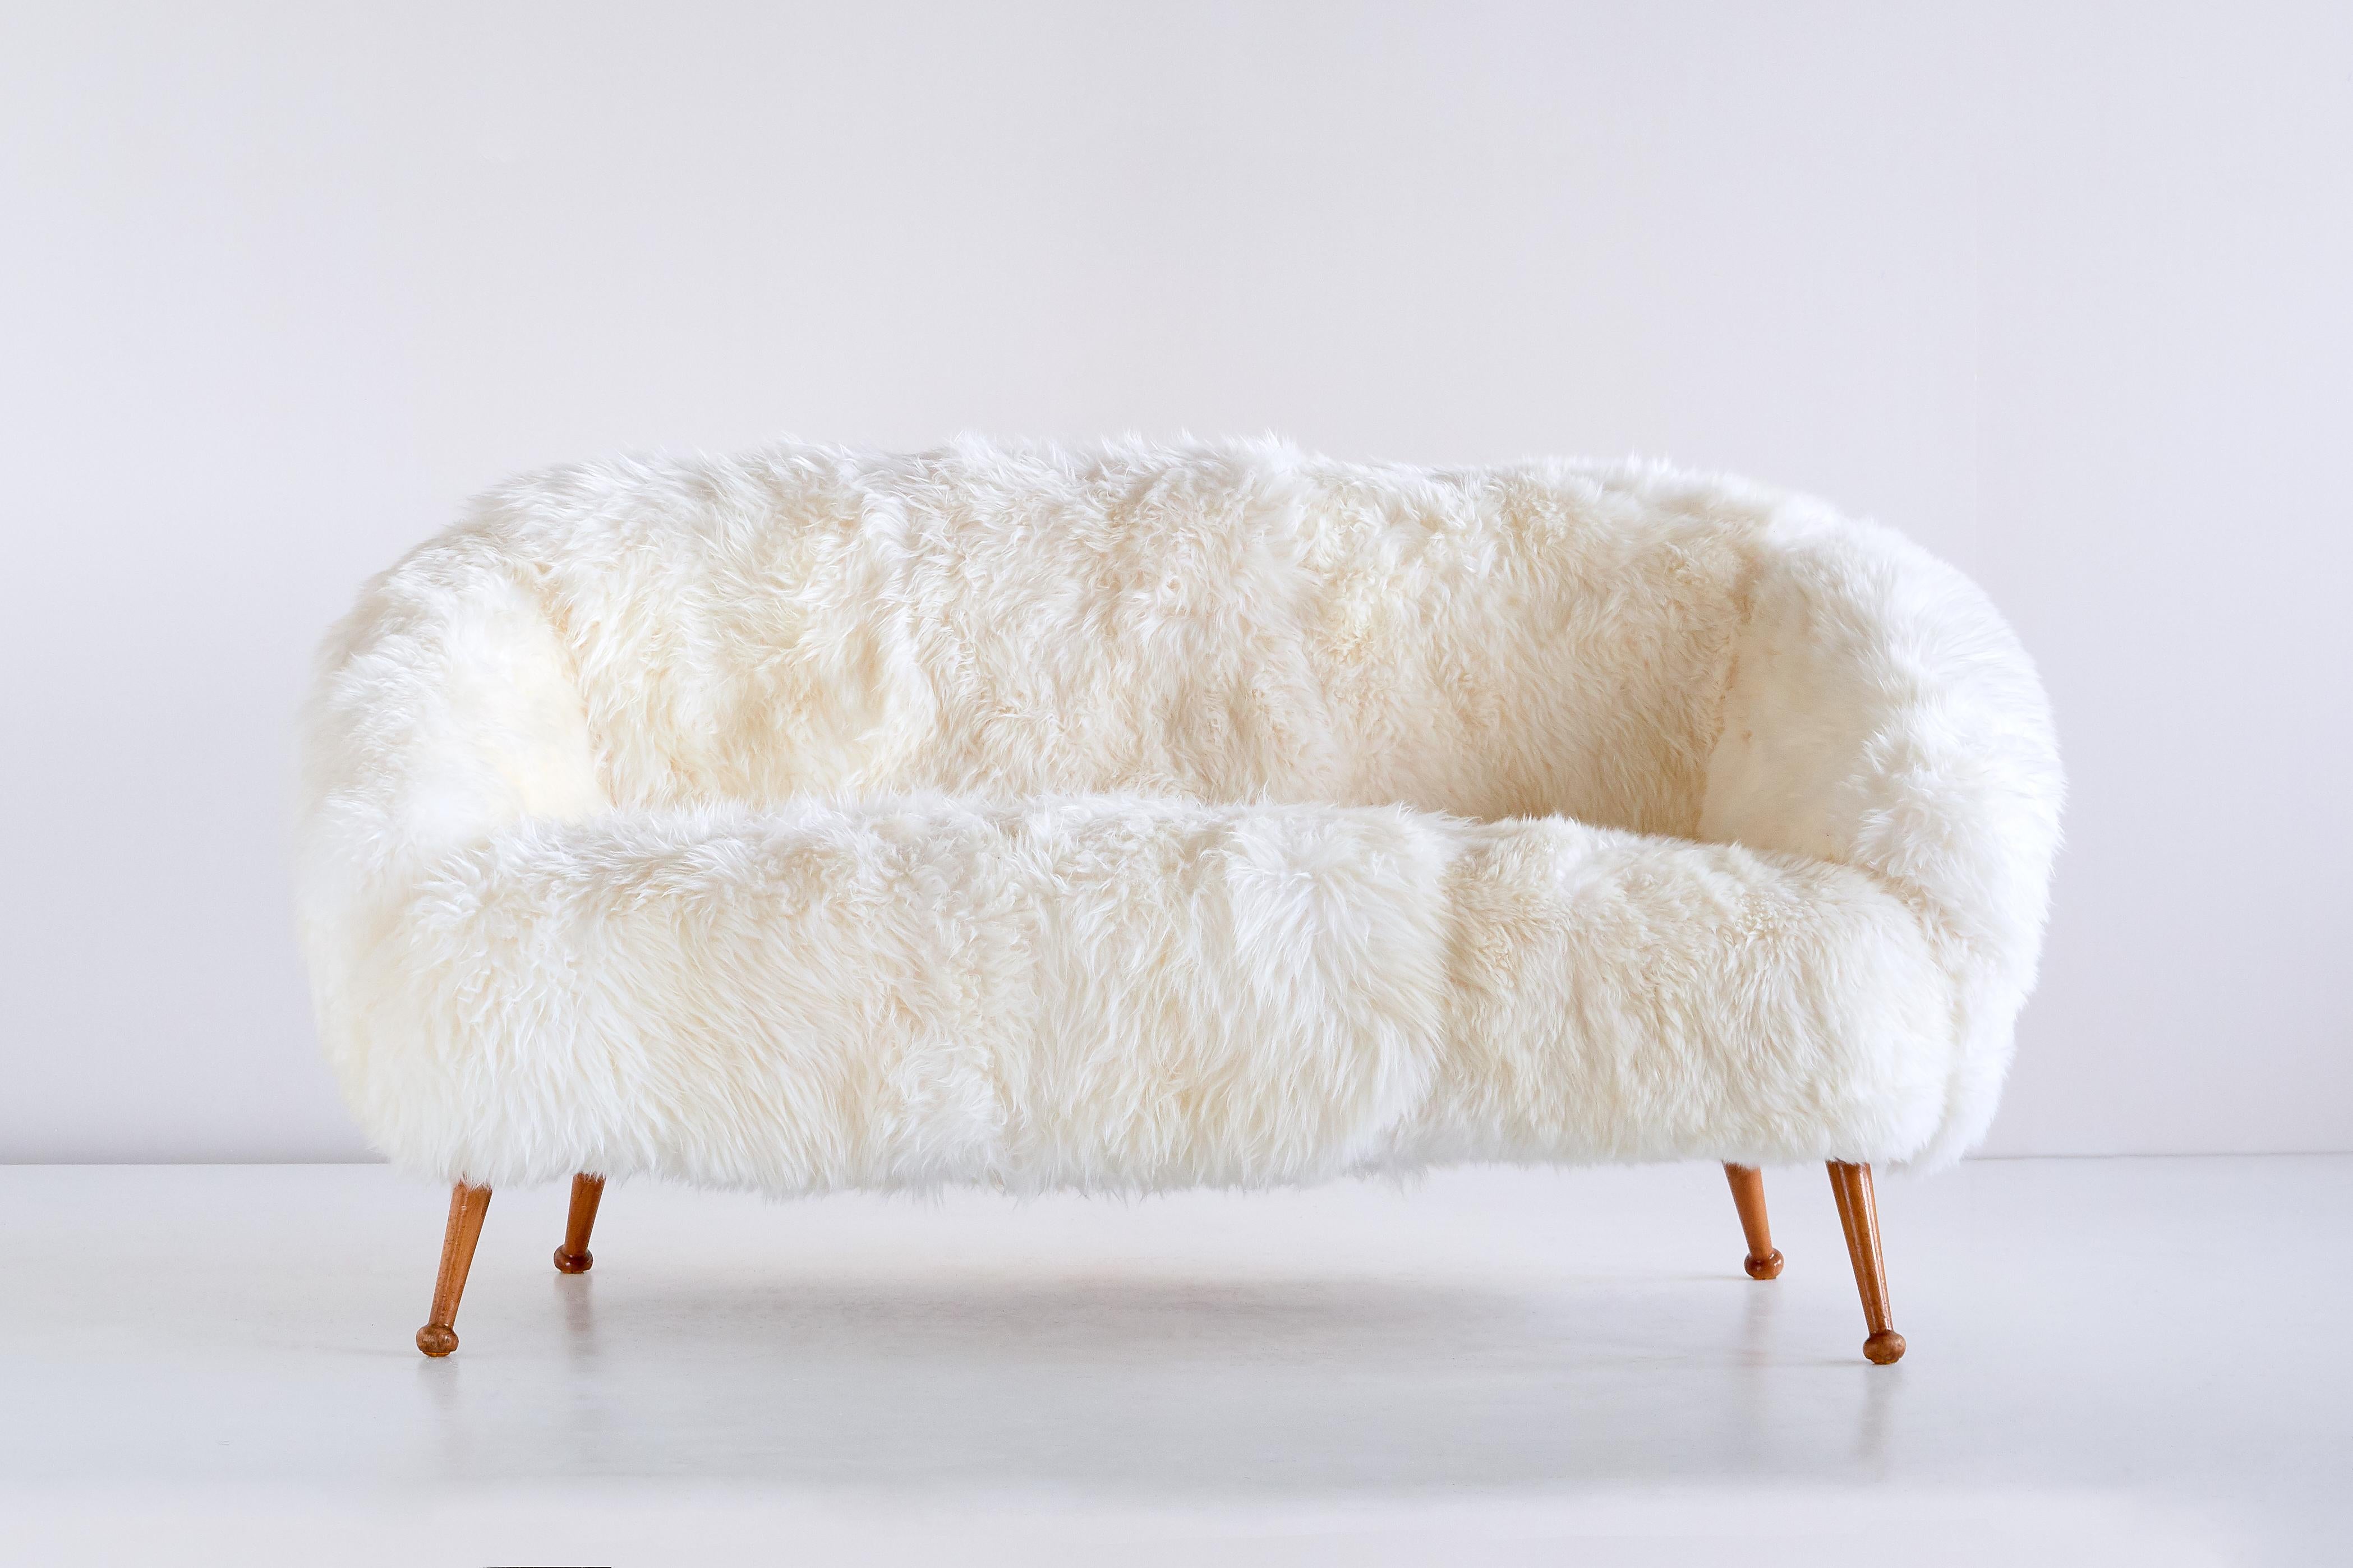 This striking sofa was designed by Ragnar Helsén and produced by AB Stjernmöbler in Herrljunga, Sweden in 1956. The model of the sofa and its matching armchair was named Vinga. The two seat sofa is upholstered in a white long hair sheepskin. The